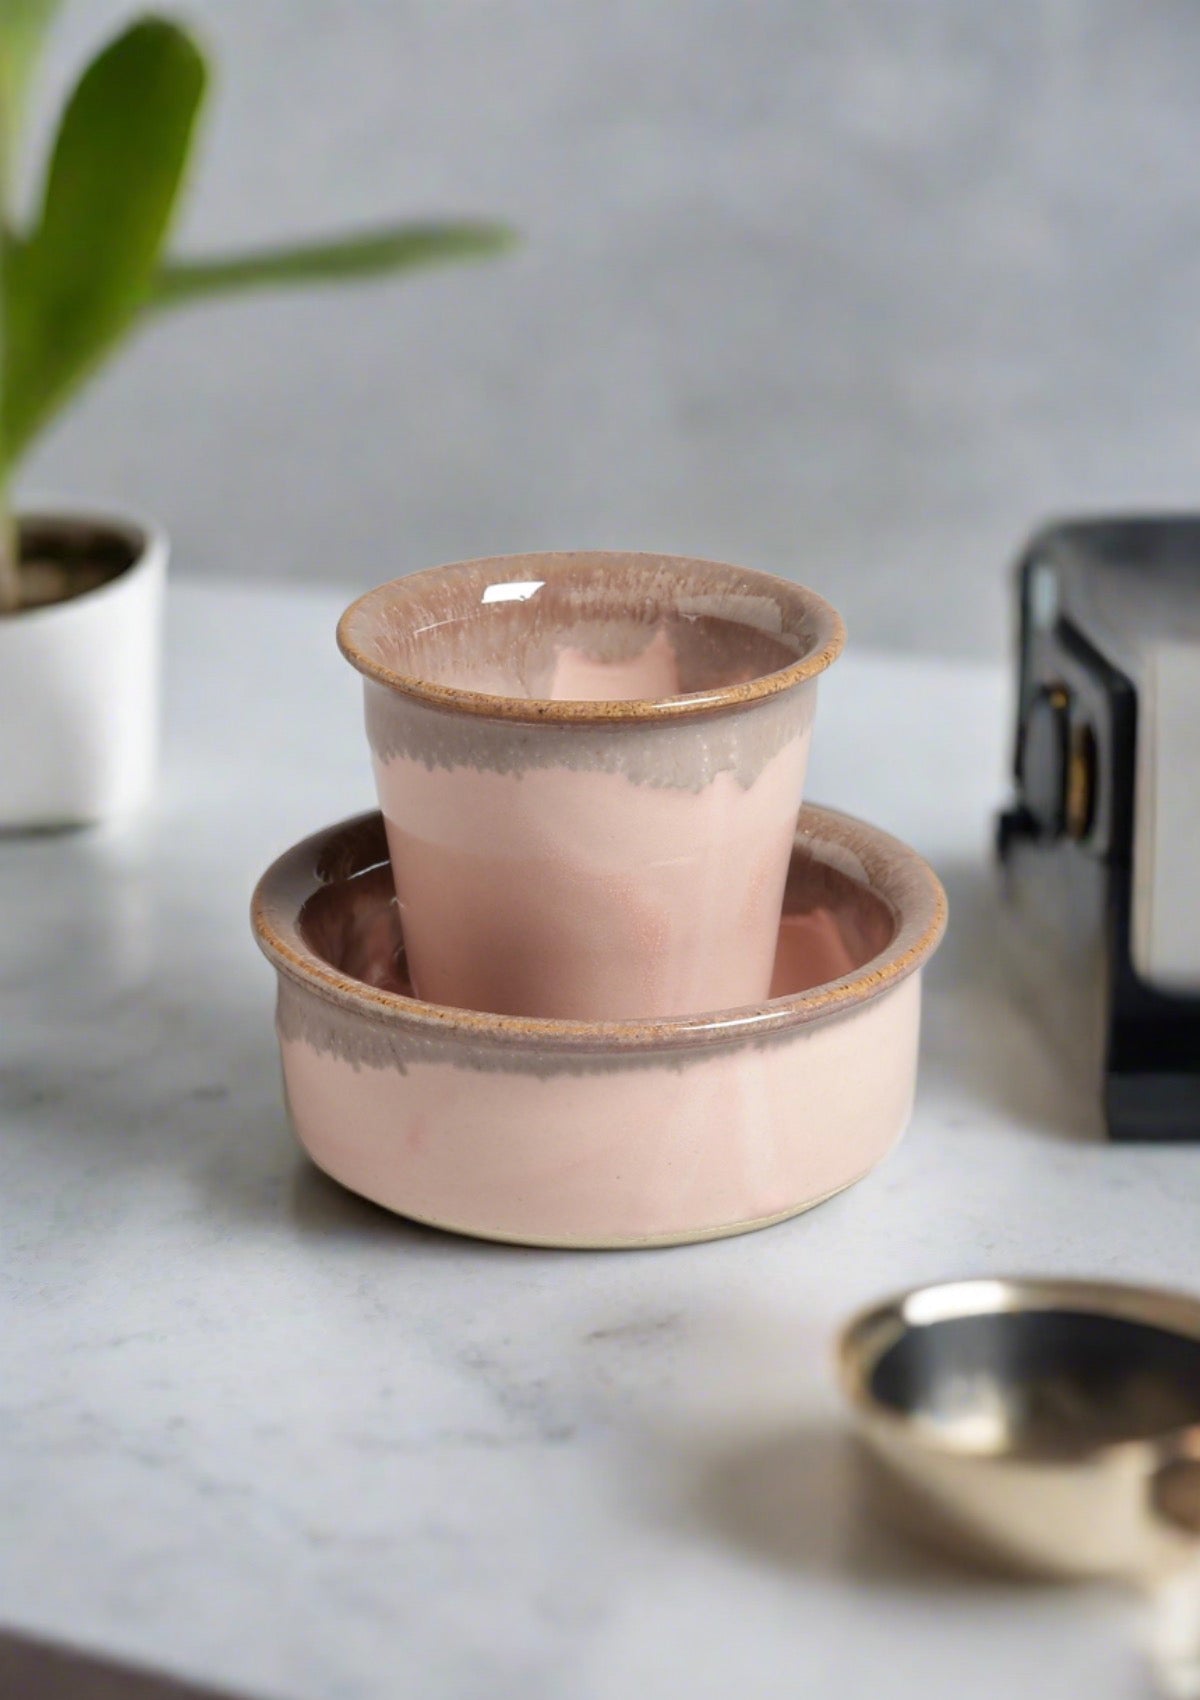 Filter coffee set of 2 - Pink and grey